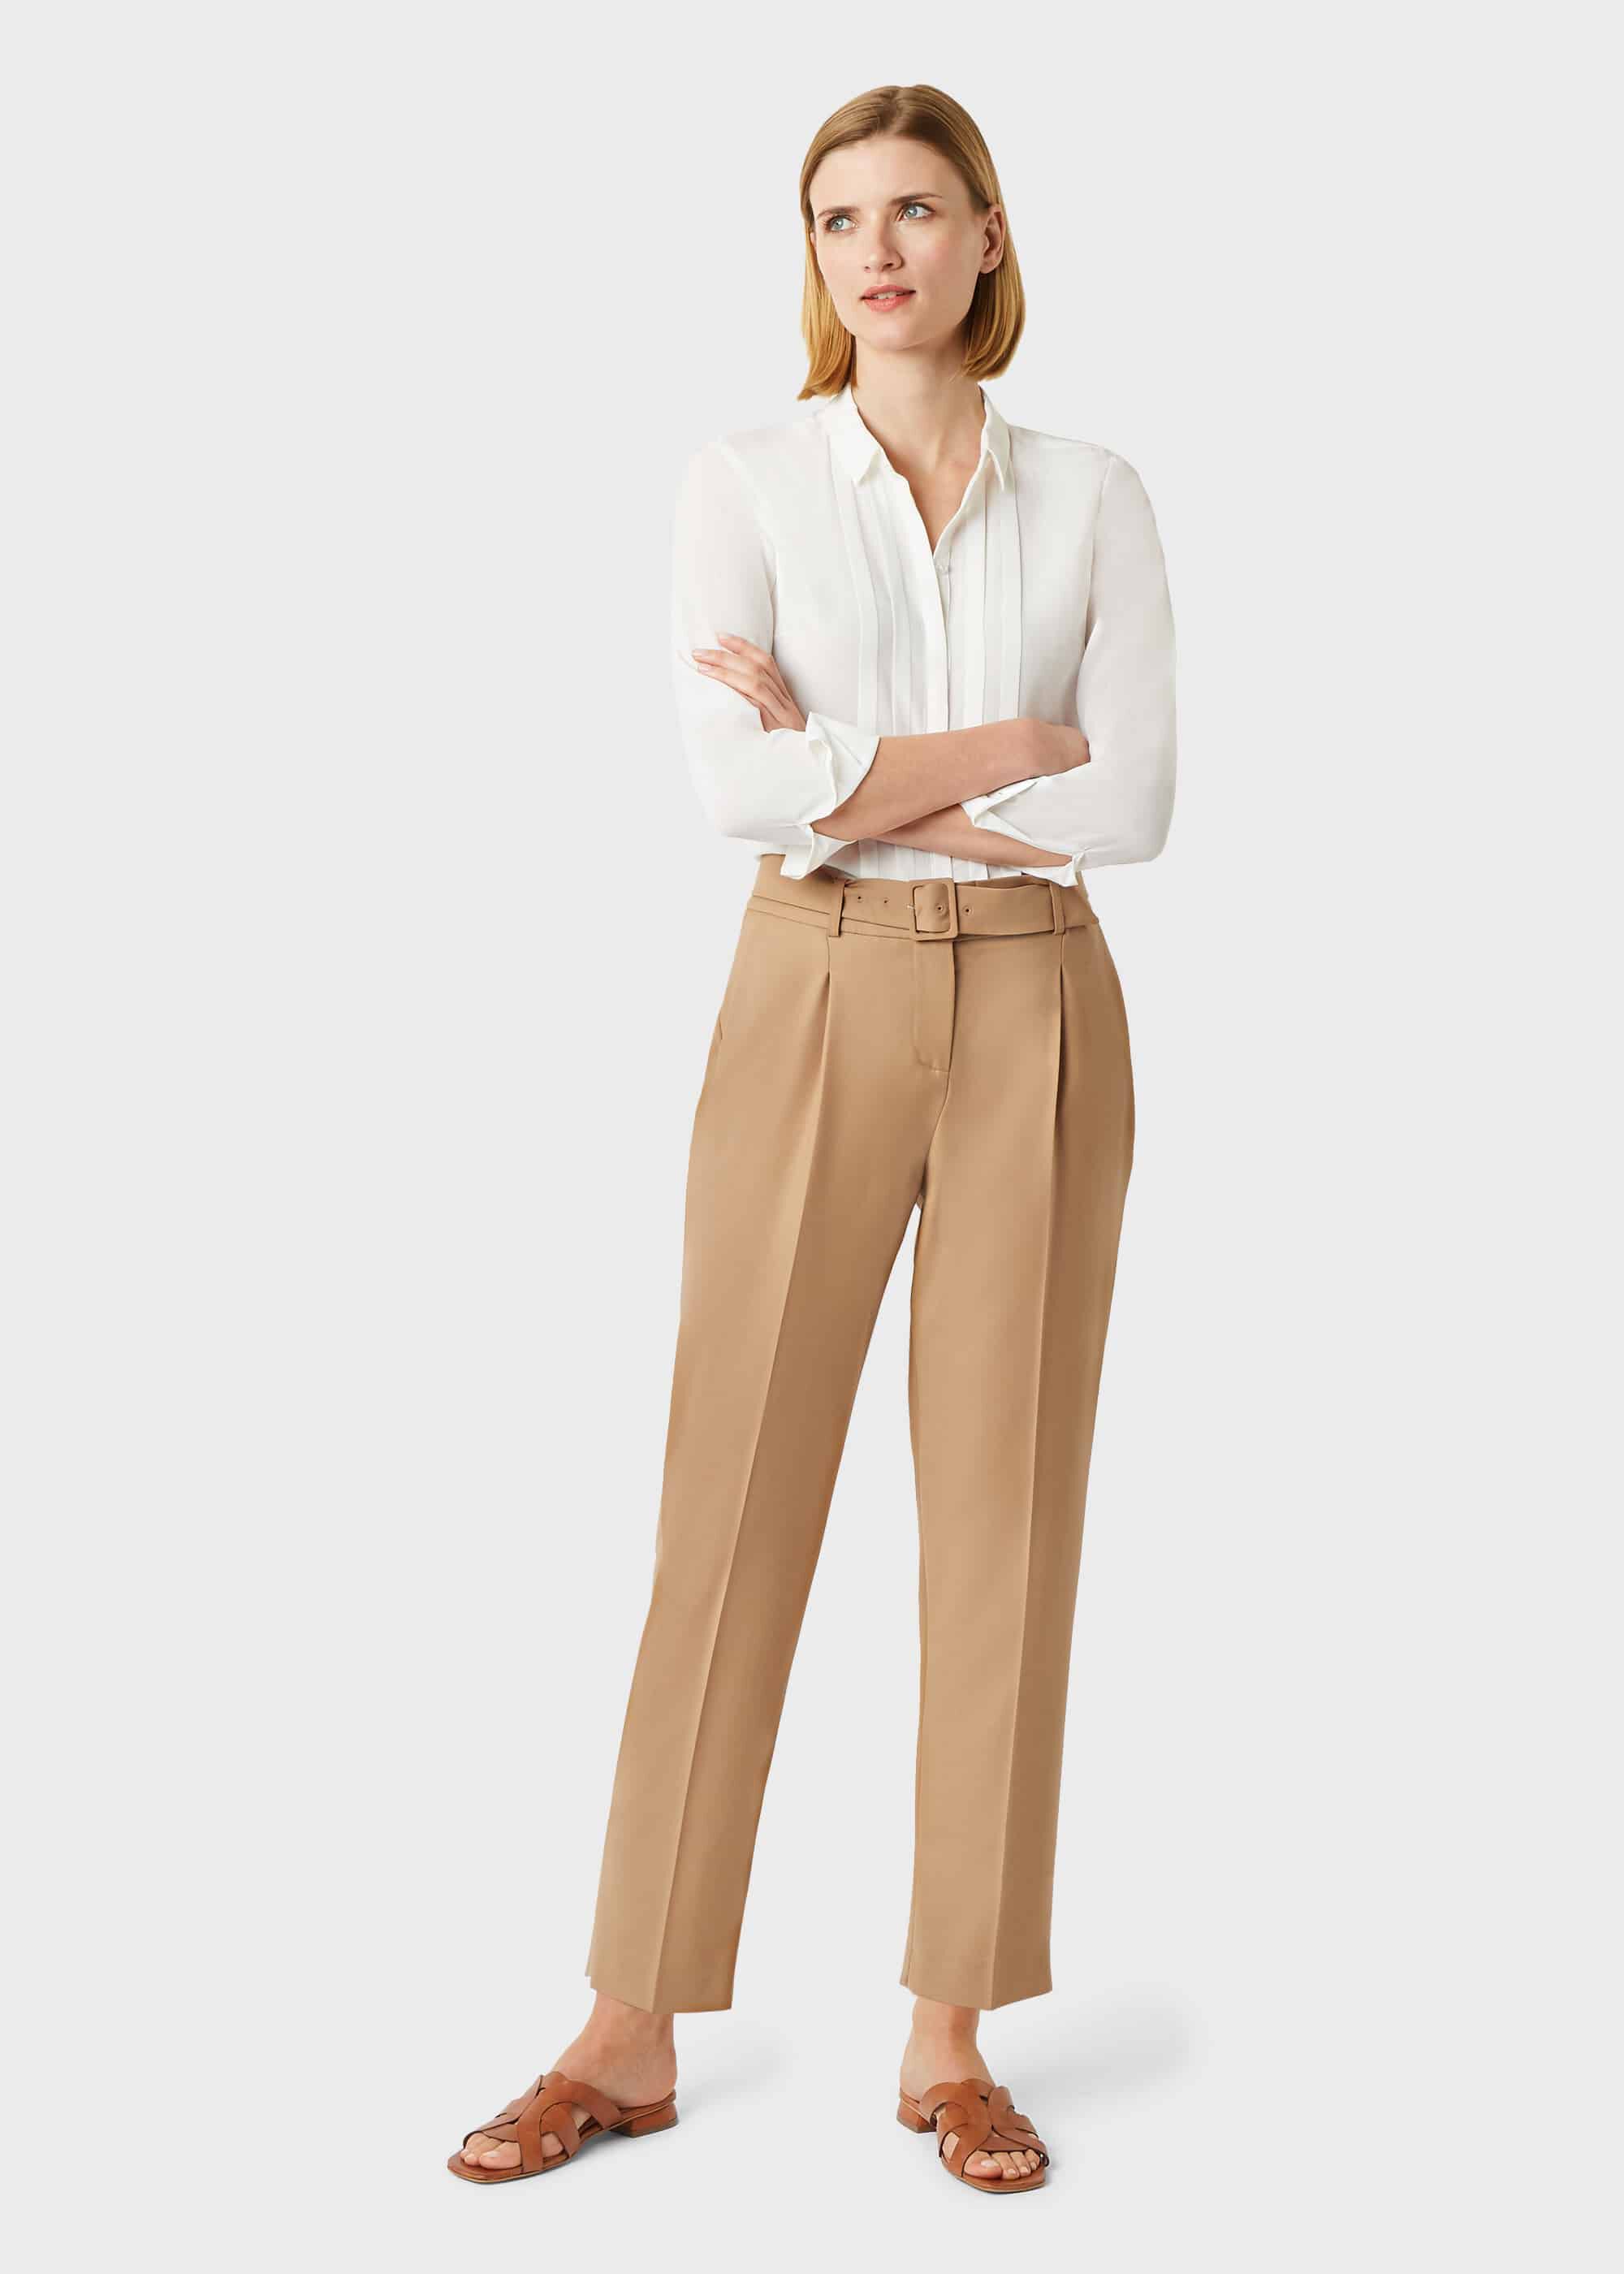 Petite Camel Fold Over Front Tailored Trousers  PrettyLittleThing